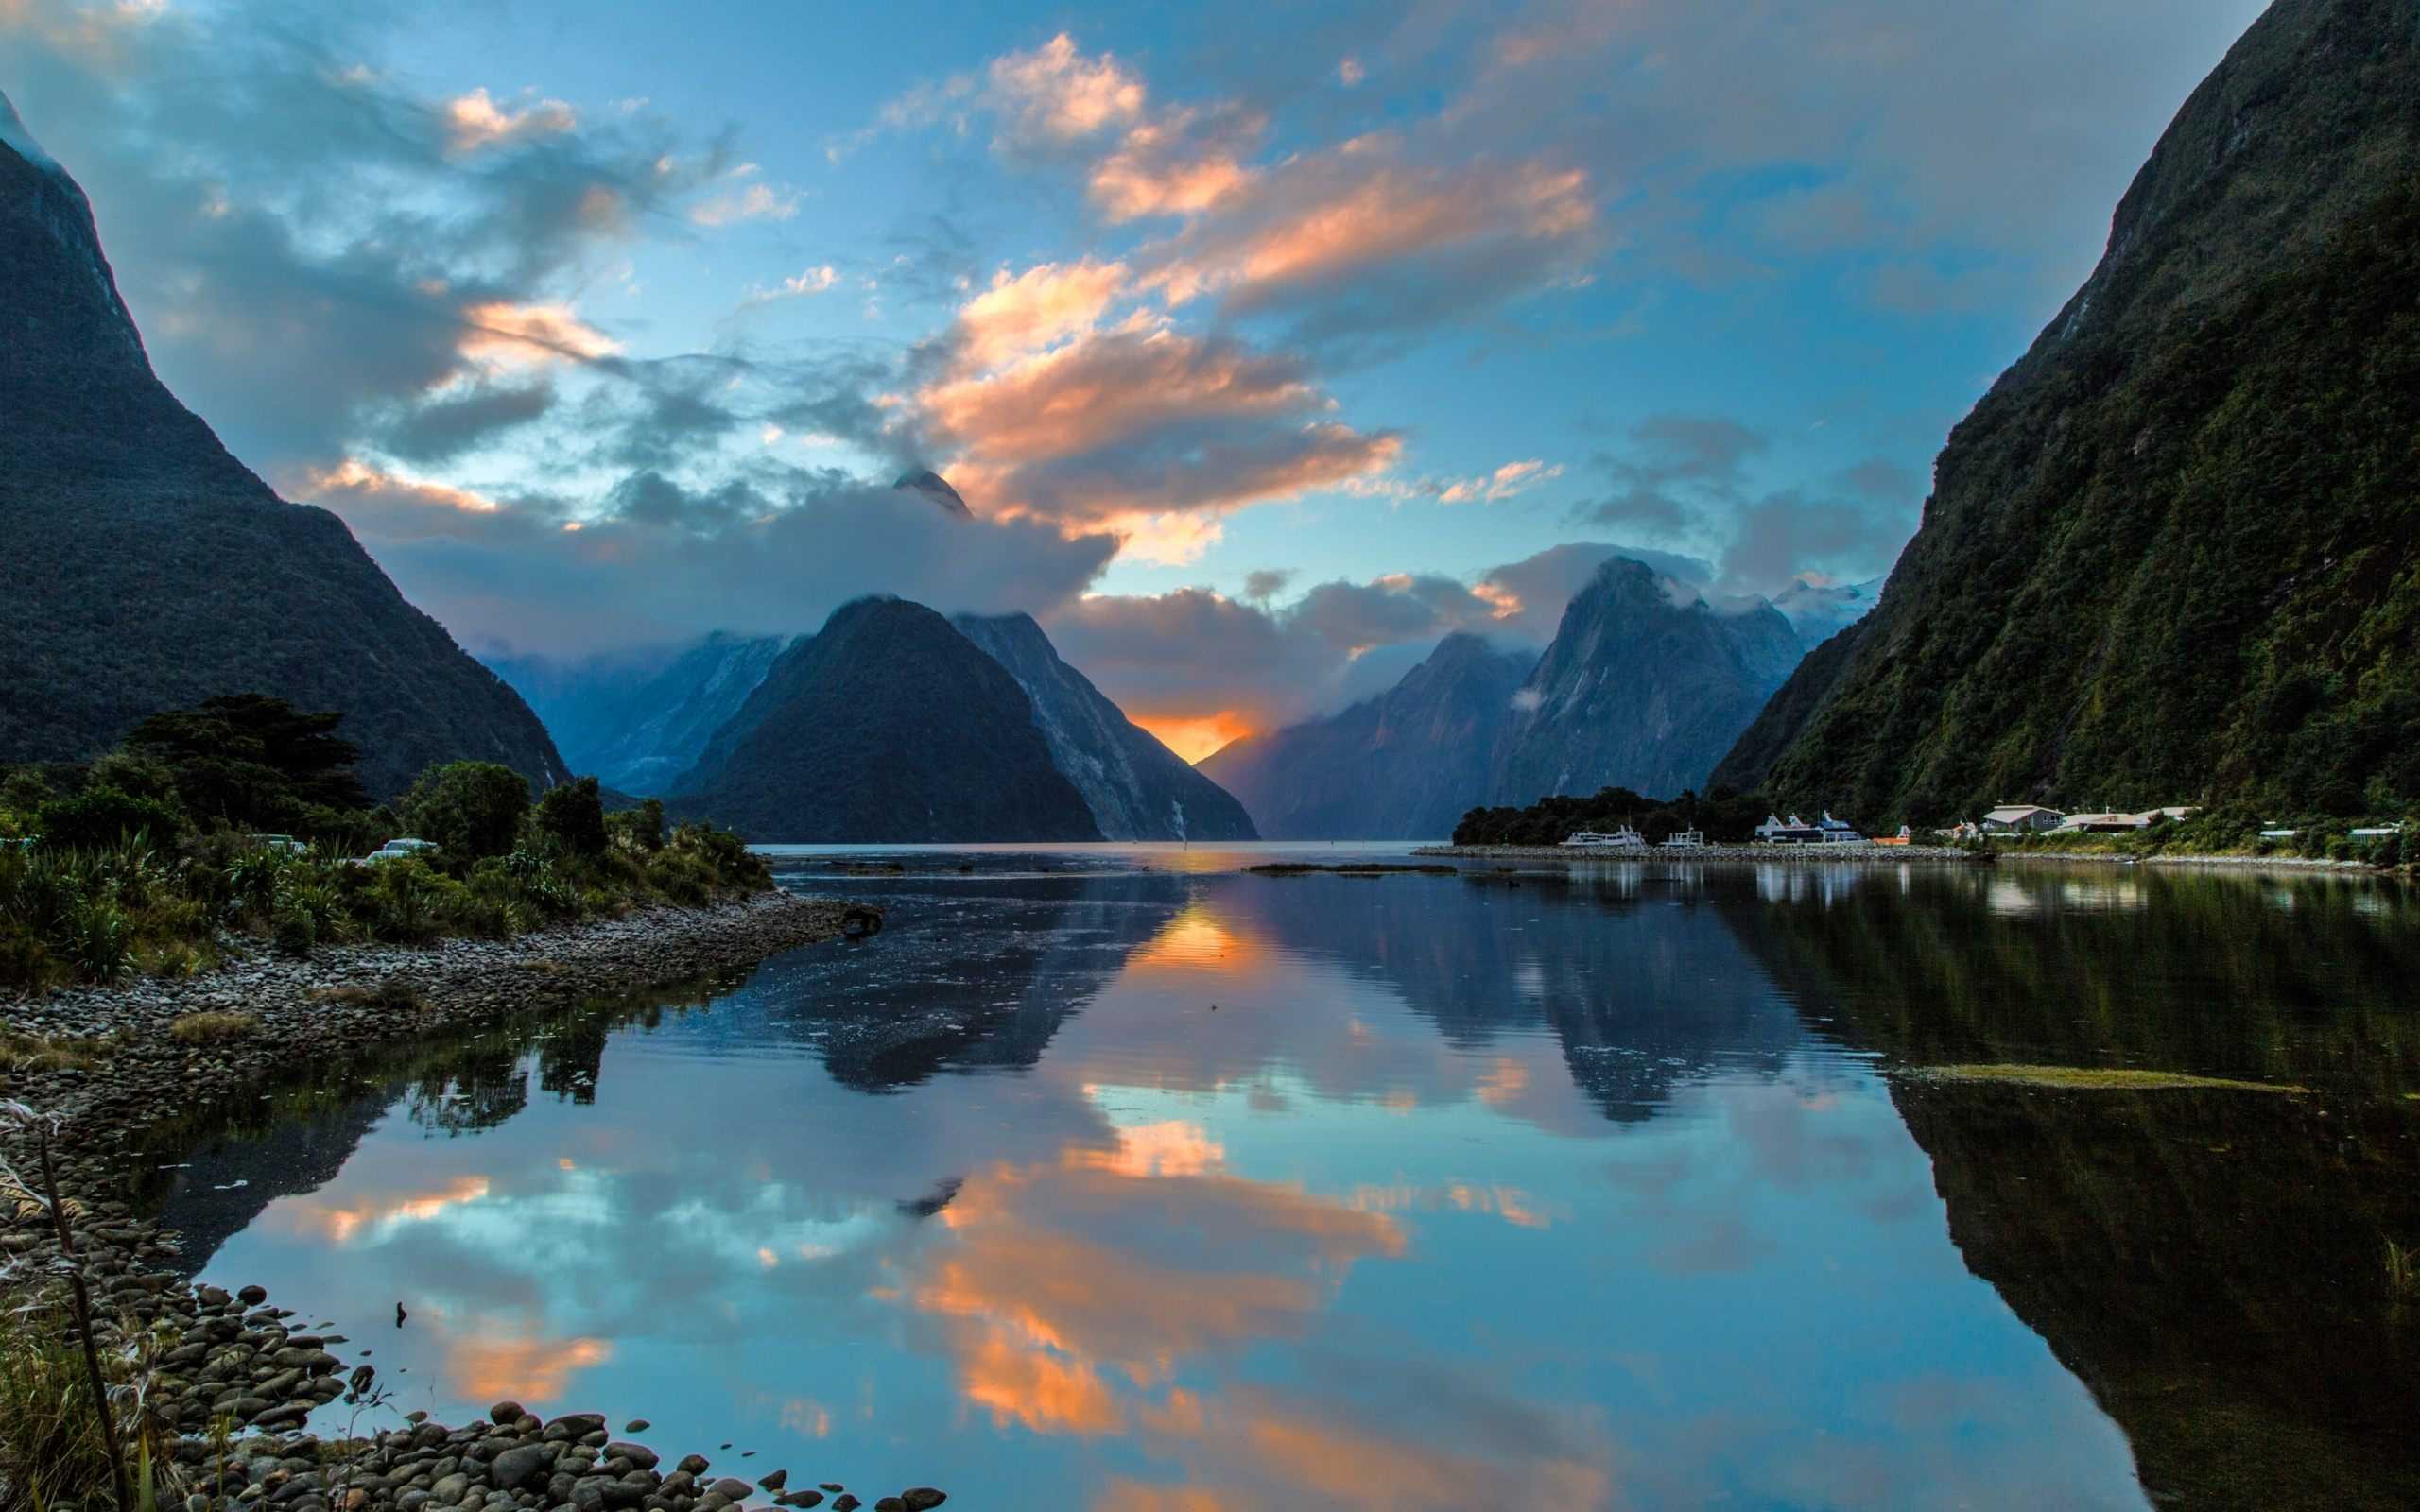 Milford Sound New Zealand Wallpaper HD Download   Top 10